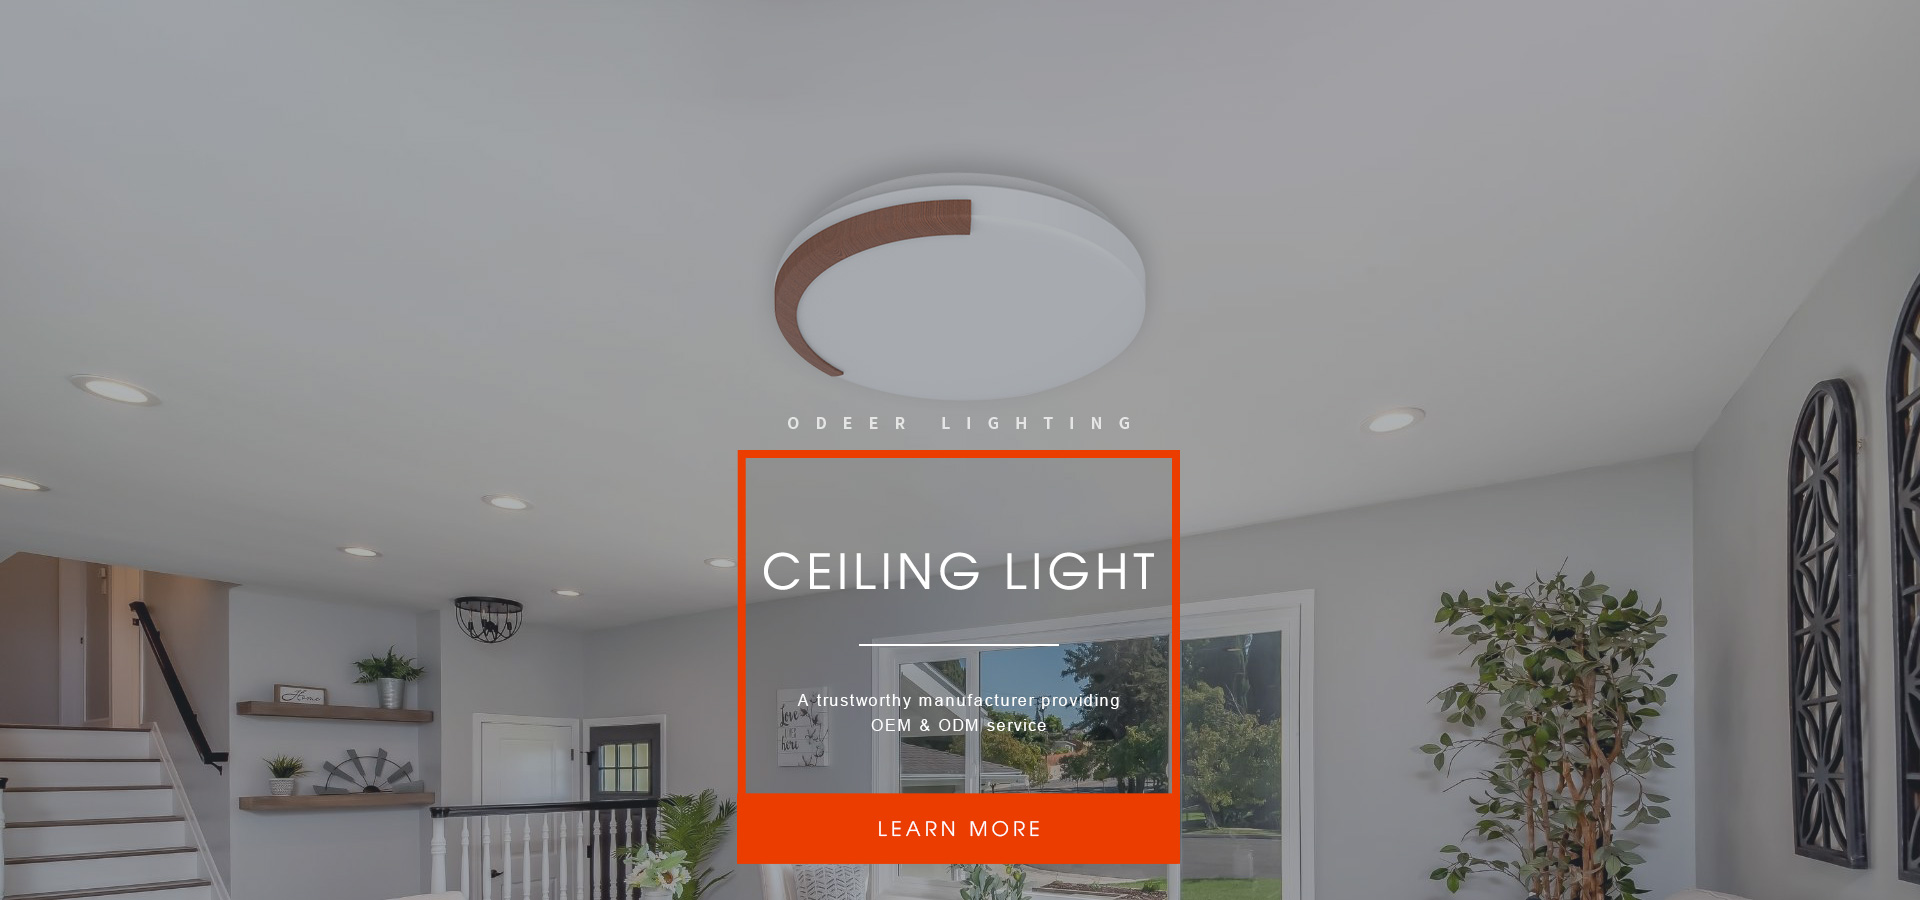 Engros UItra Thin Ceiling Light